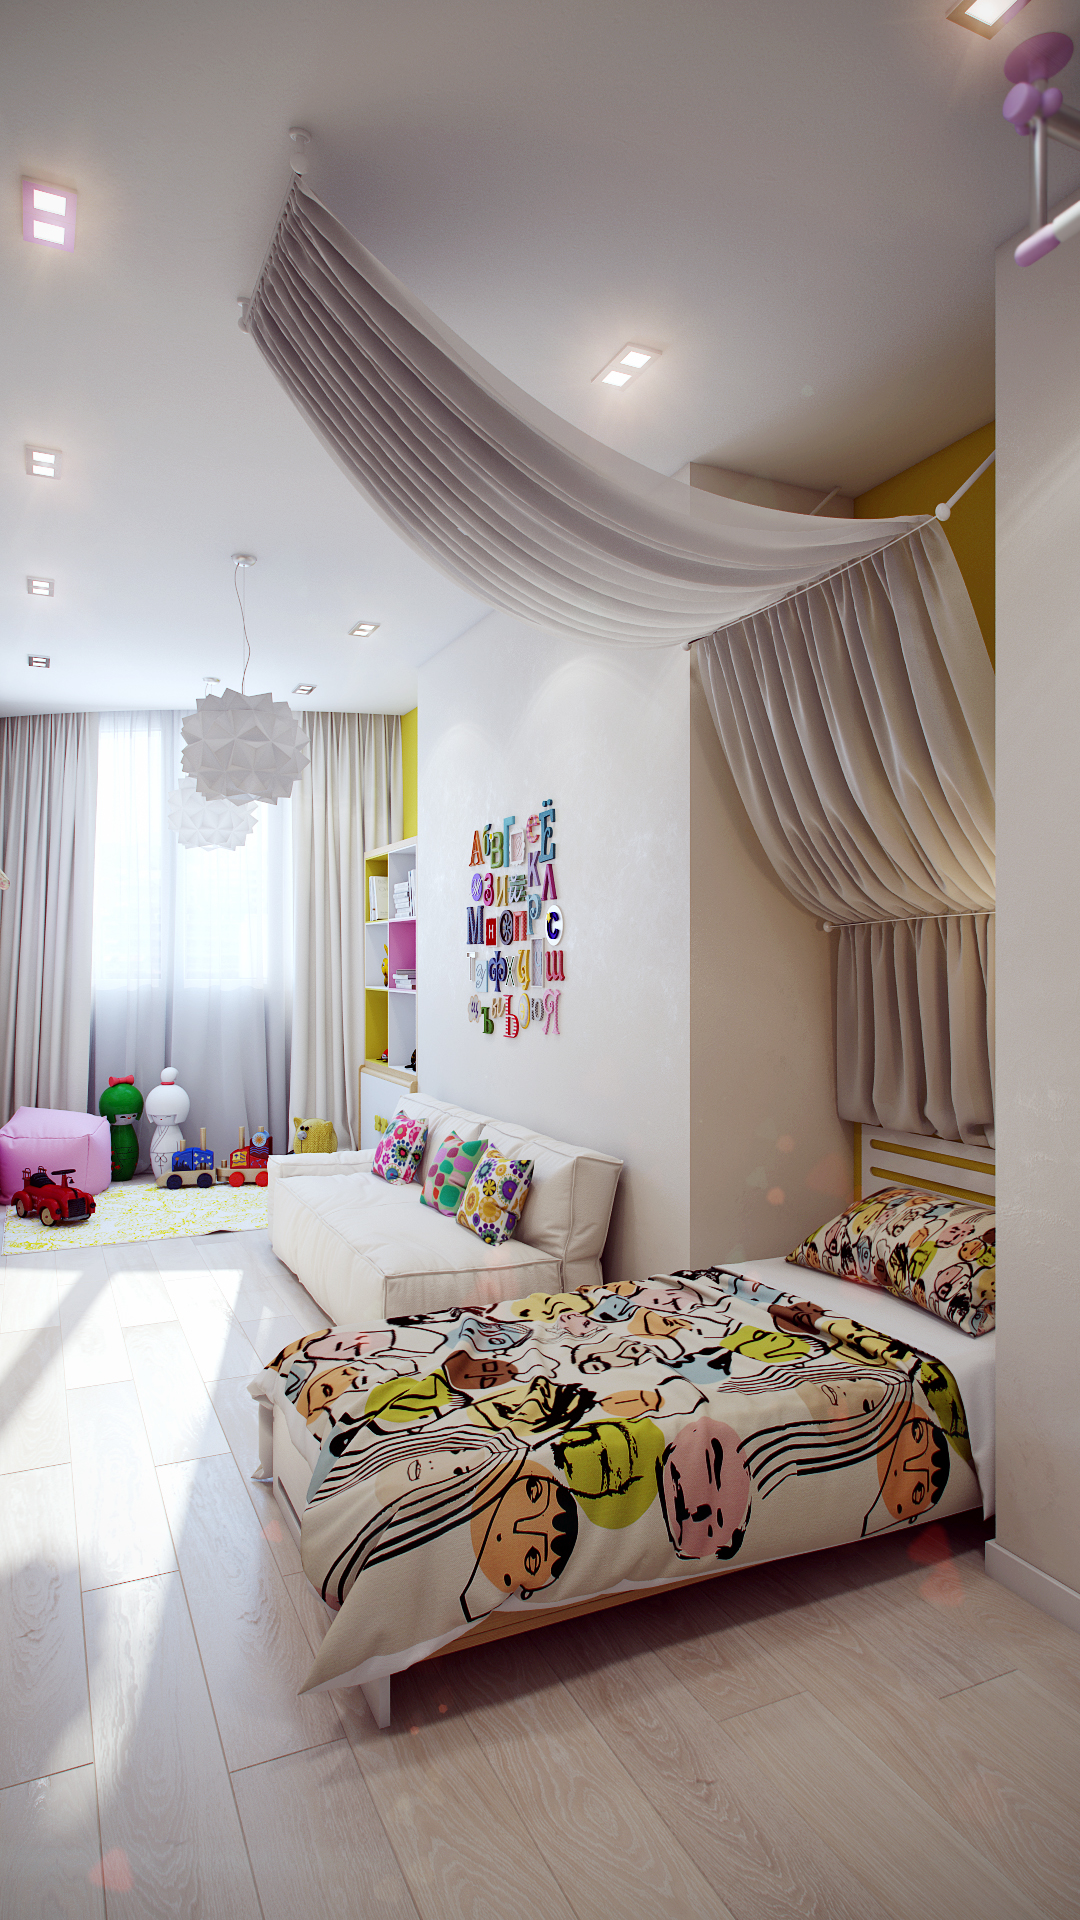 beautiful bedroom designs for girls "width =" 1080 "height =" 1920 "srcset =" https://mileray.com/wp-content/uploads/2020/05/1588510708_936_Attractive-Girls-Bedroom-Decorating-Ideas-With-Beautiful-And-Colorful-Themes.jpg 1080w, https: // mileray.com/wp-content/uploads/2016/07/Pavel-Vetrov-2-169x300.jpg 169w, https://mileray.com/wp-content/uploads/2016/07/Pavel-Vetrov-2-768x1365 .jpg 768w, https://mileray.com/wp-content/uploads/2016/07/Pavel-Vetrov-2-576x1024.jpg 576w, https://mileray.com/wp-content/uploads/2016/07 /Pavel-Vetrov-2-696x1237.jpg 696w, https://mileray.com/wp-content/uploads/2016/07/Pavel-Vetrov-2-1068x1899.jpg 1068w, https://mileray.com/wp -content / uploads / 2016/07 / Pavel-Vetrov-2-236x420.jpg 236w "sizes =" (maximum width: 1080px) 100vw, 1080px